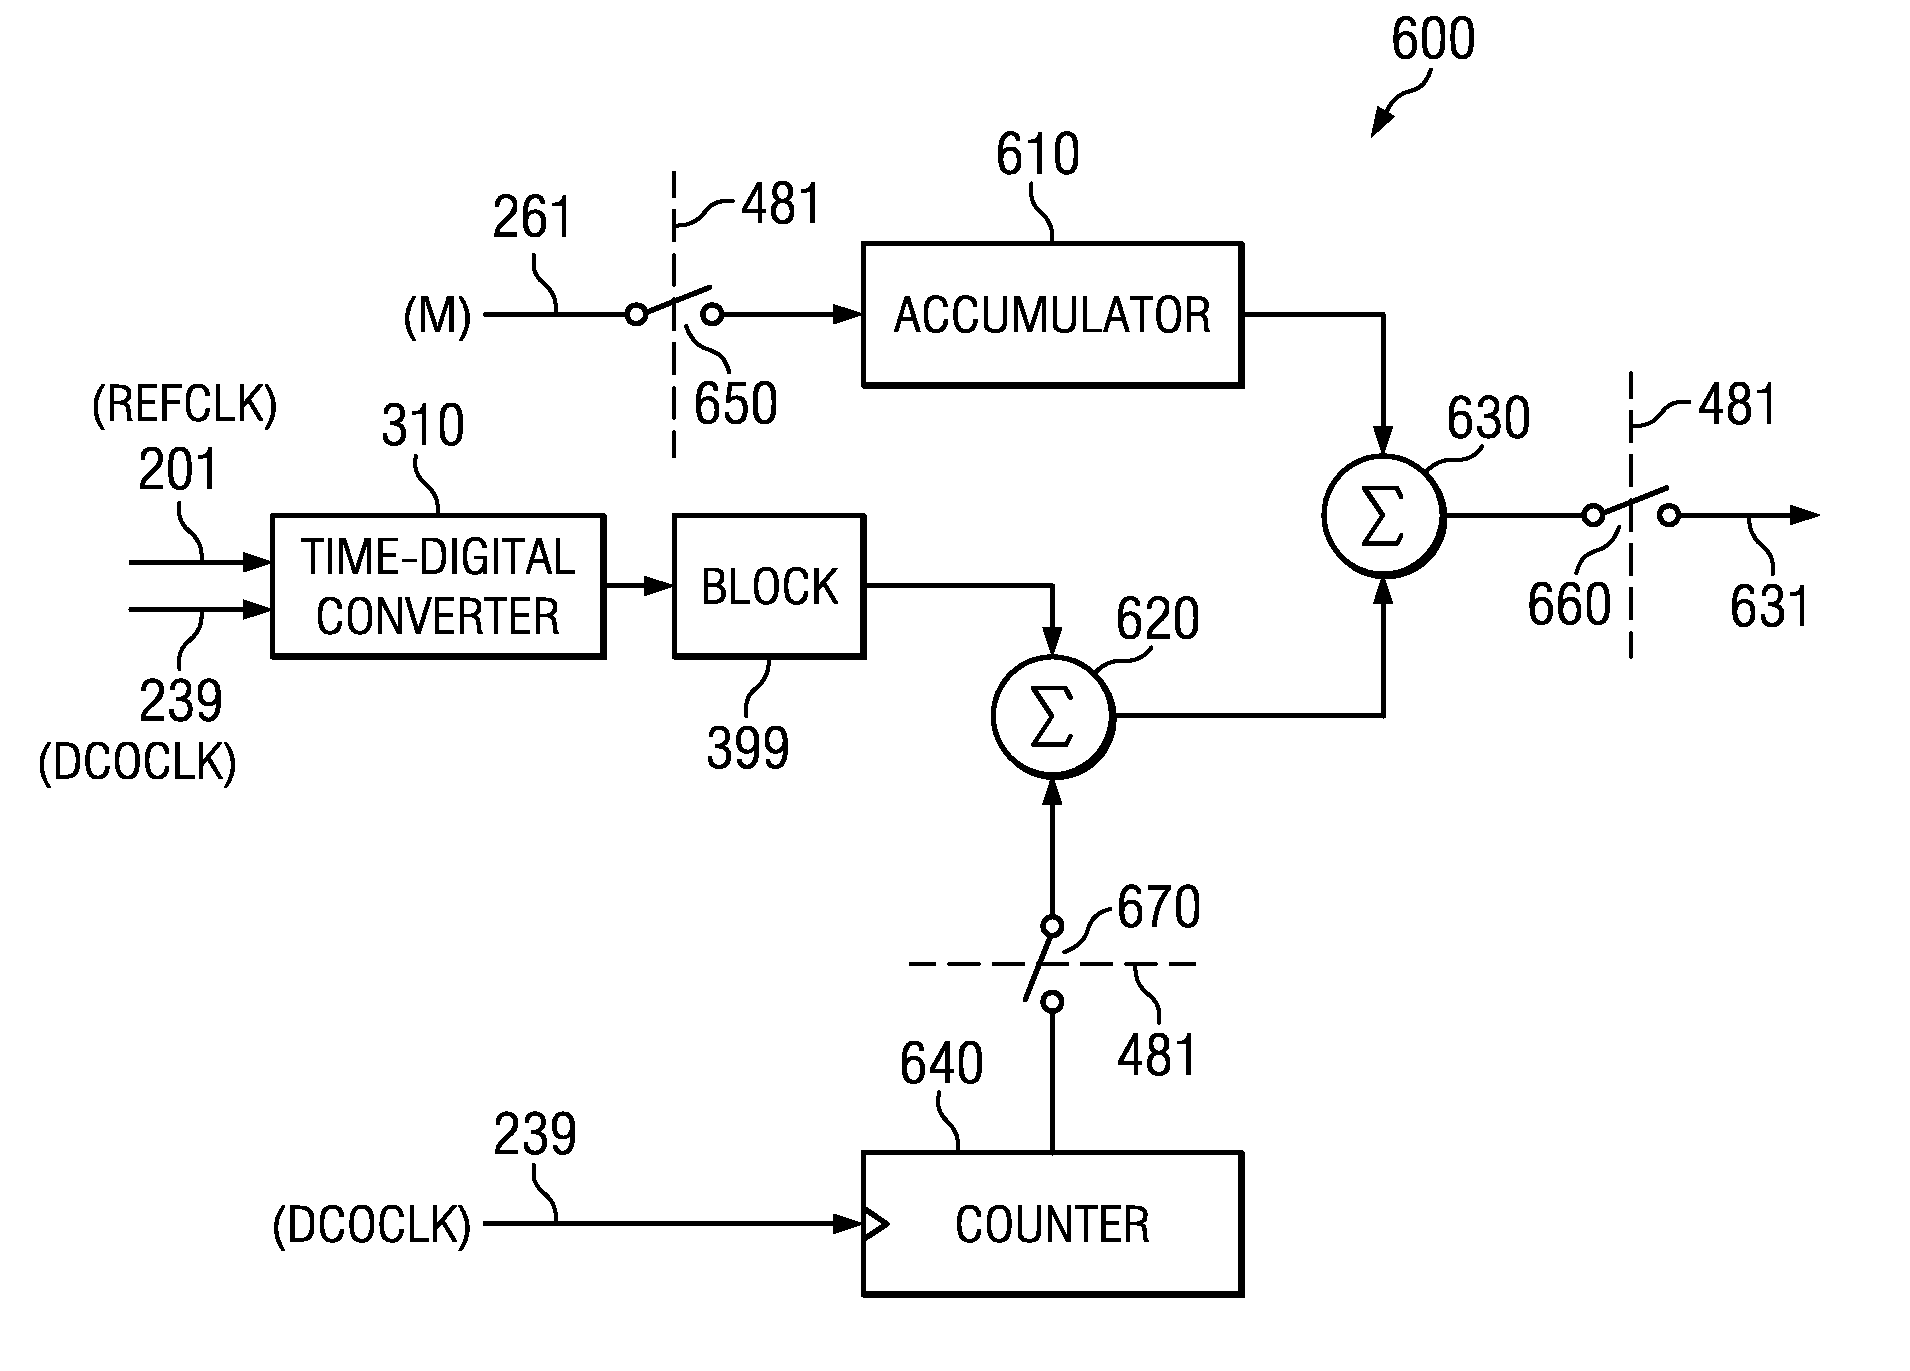 Reference clock re-timing scheme in electronic circuits